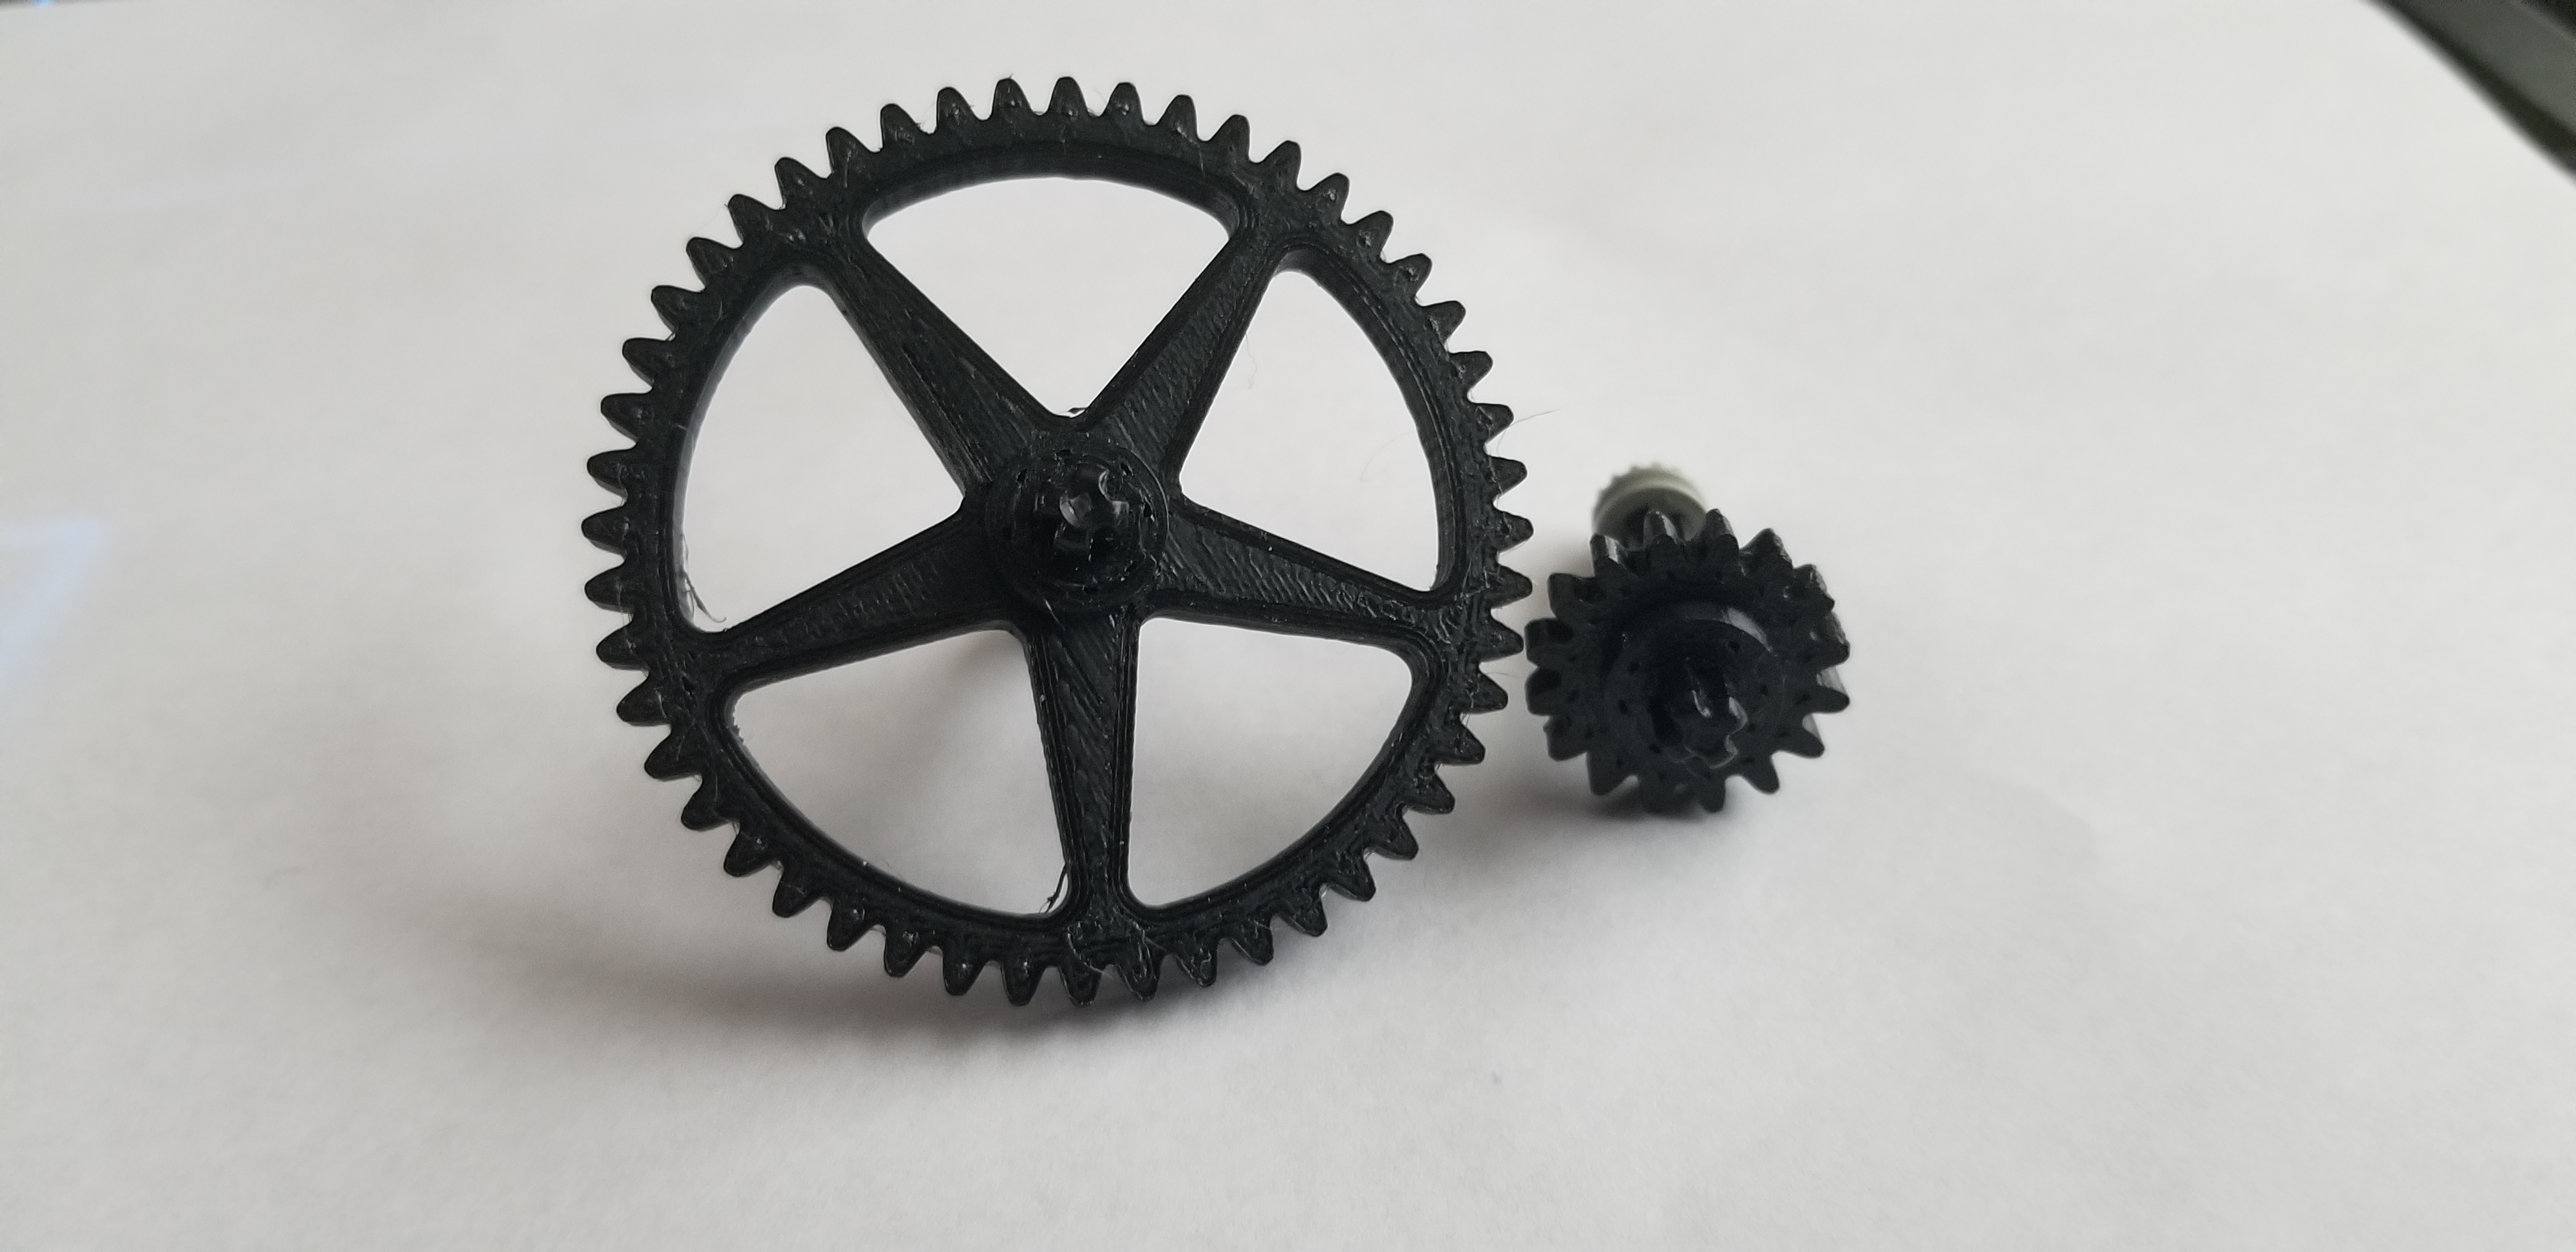 Lego Technic compatible 16 tooth gear